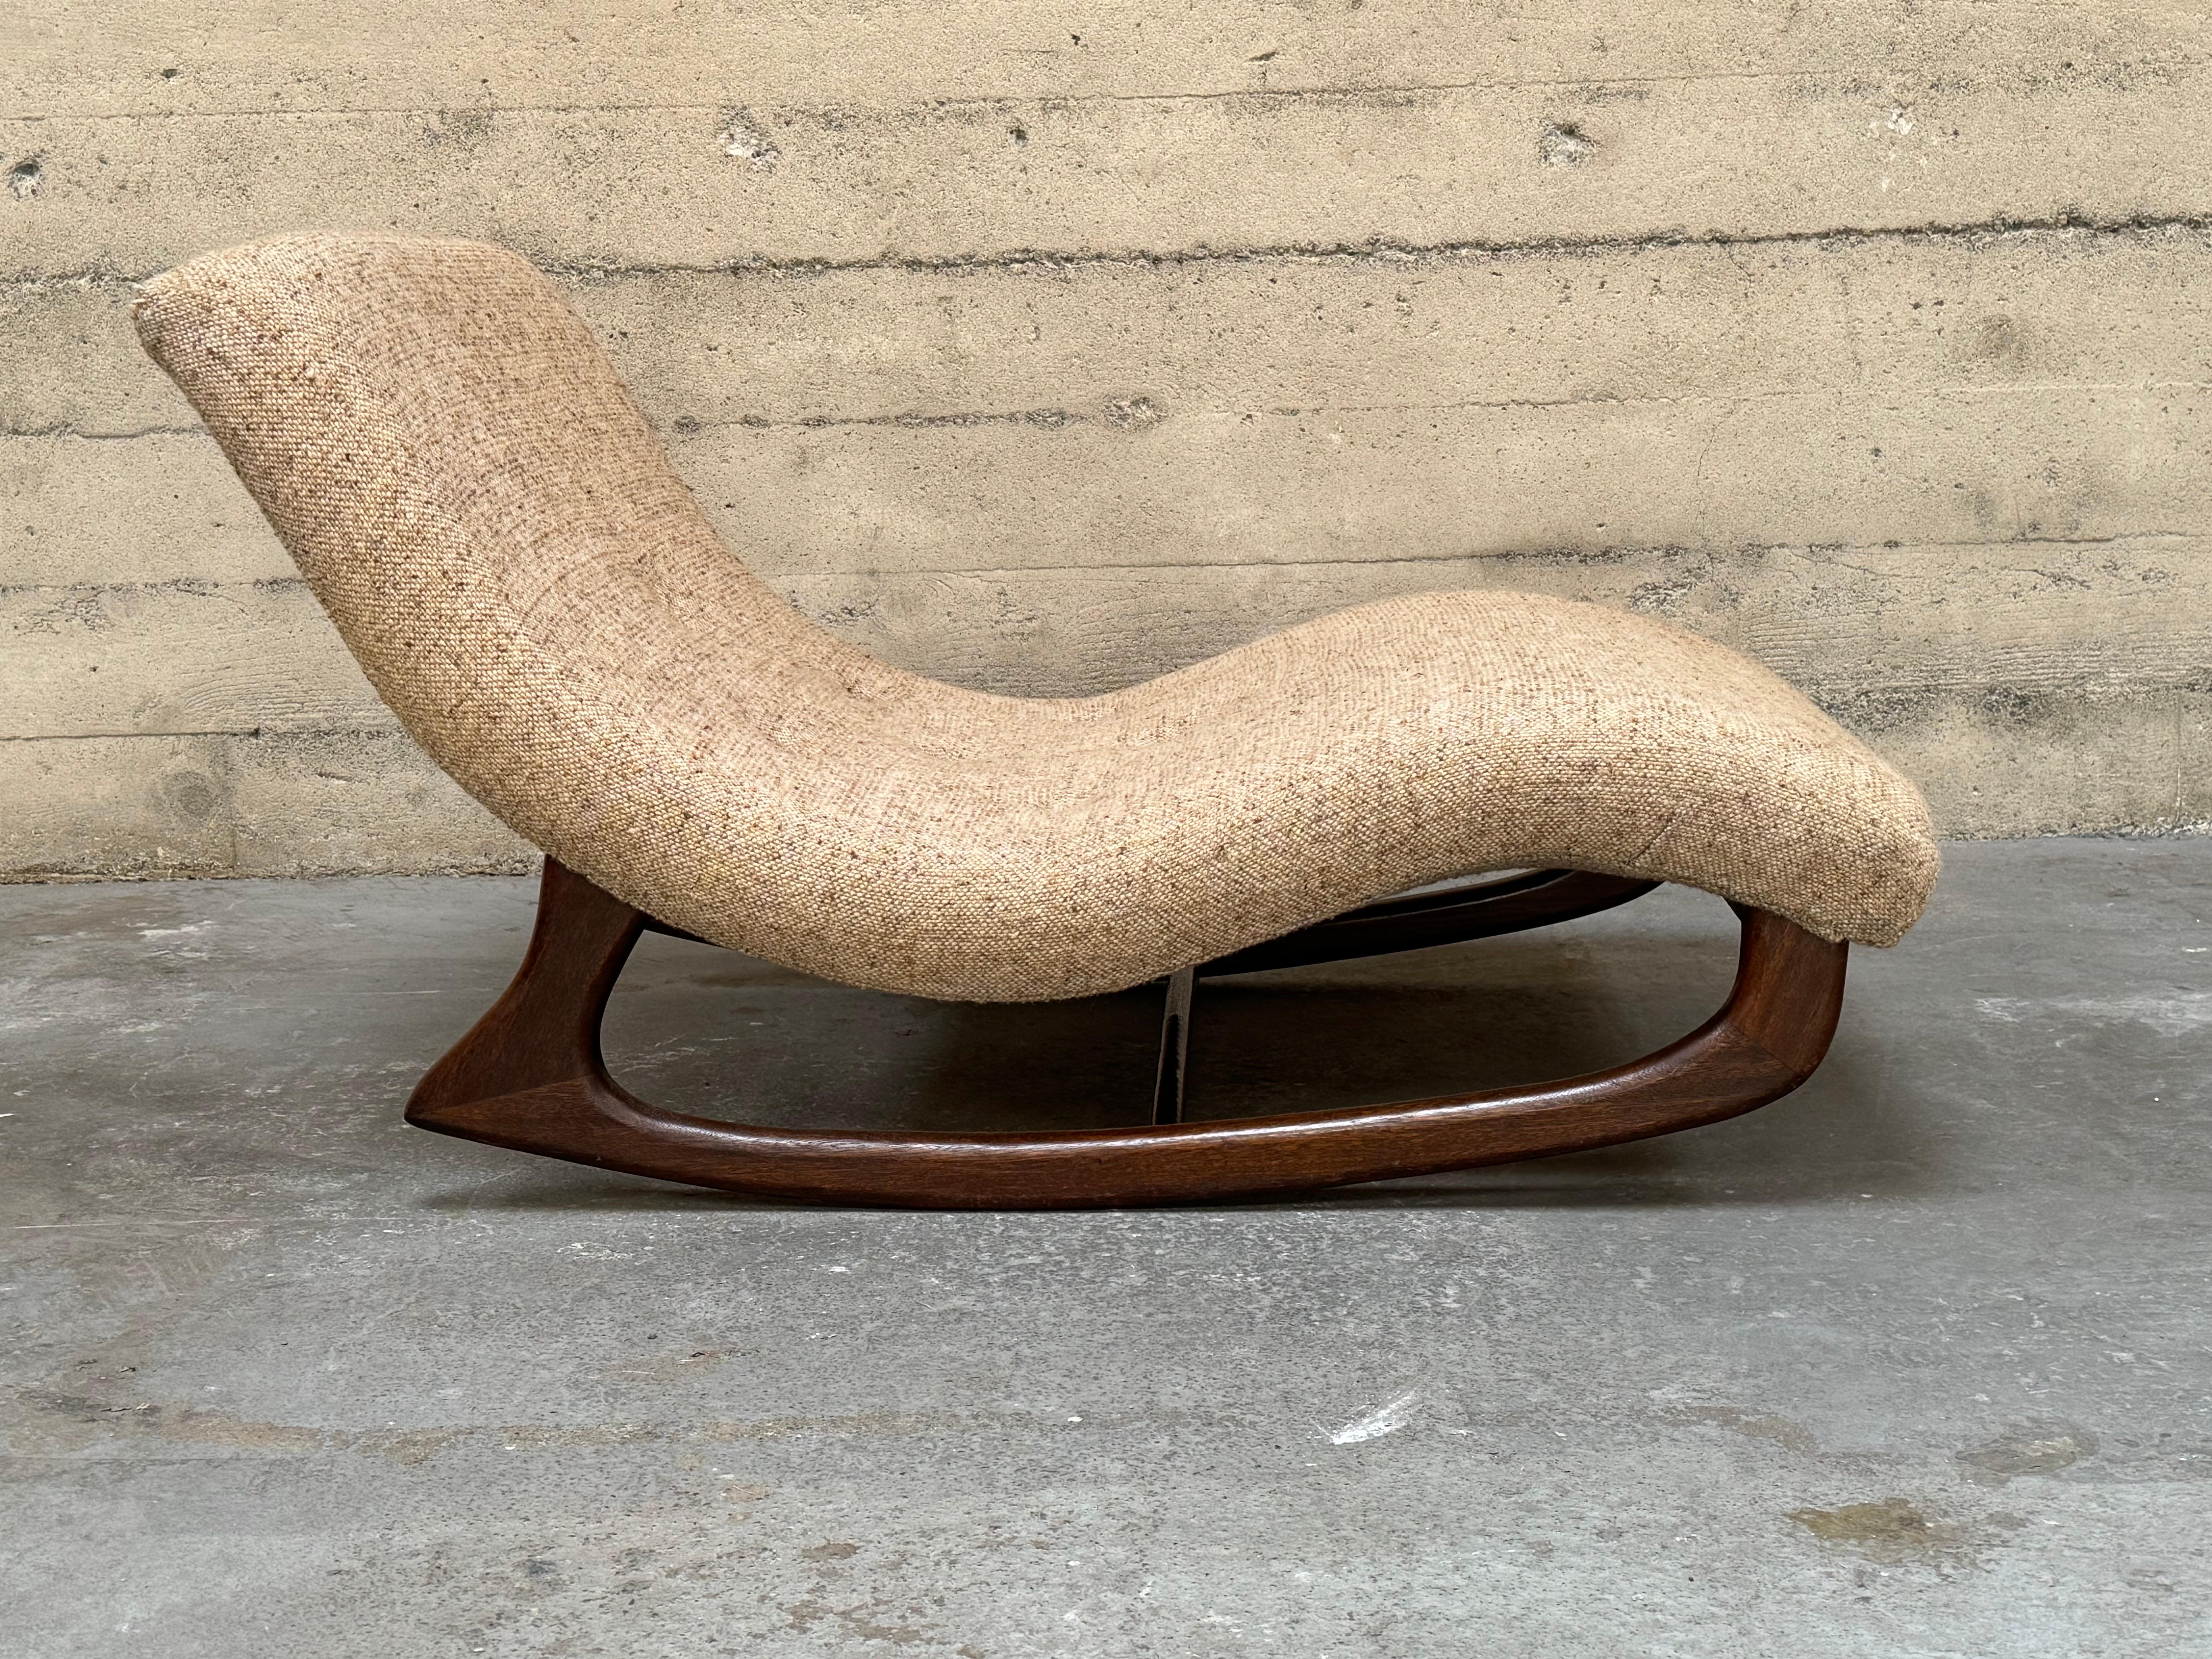 Circa 1960s Adrian Pearsall Rocking Wave Chaise Lounge #2  4